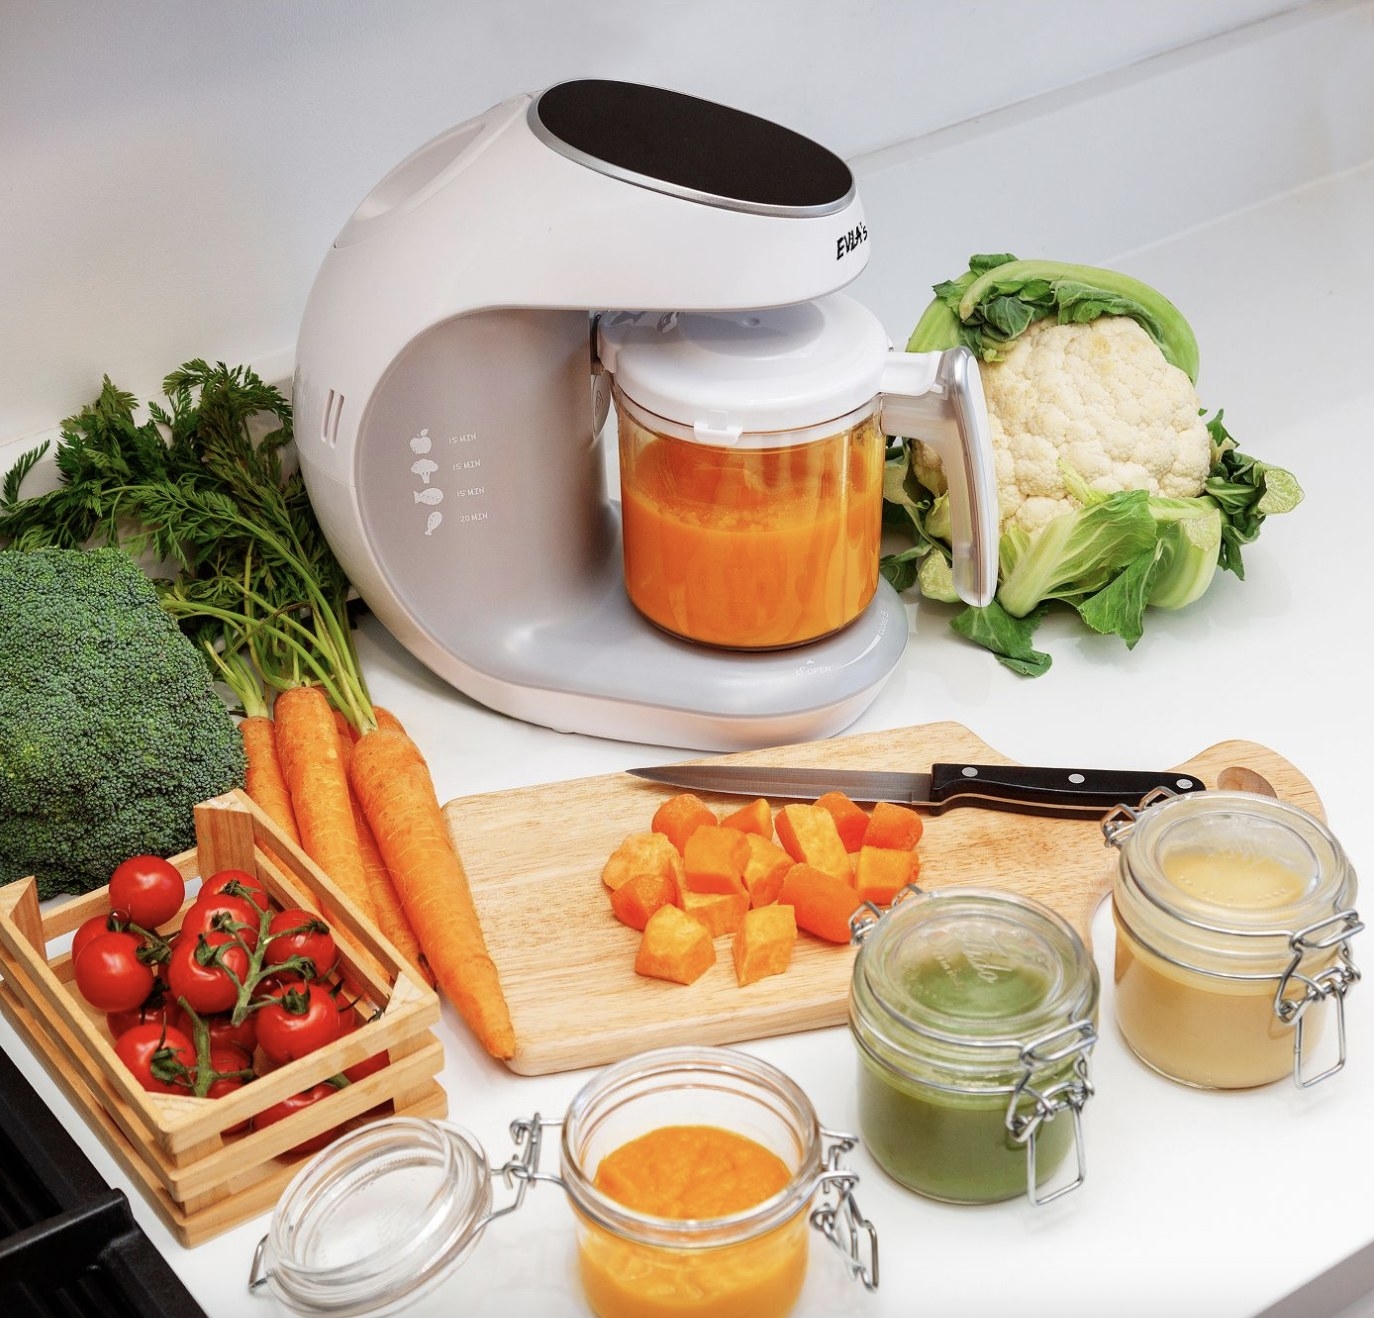 Baby food maker with veggies